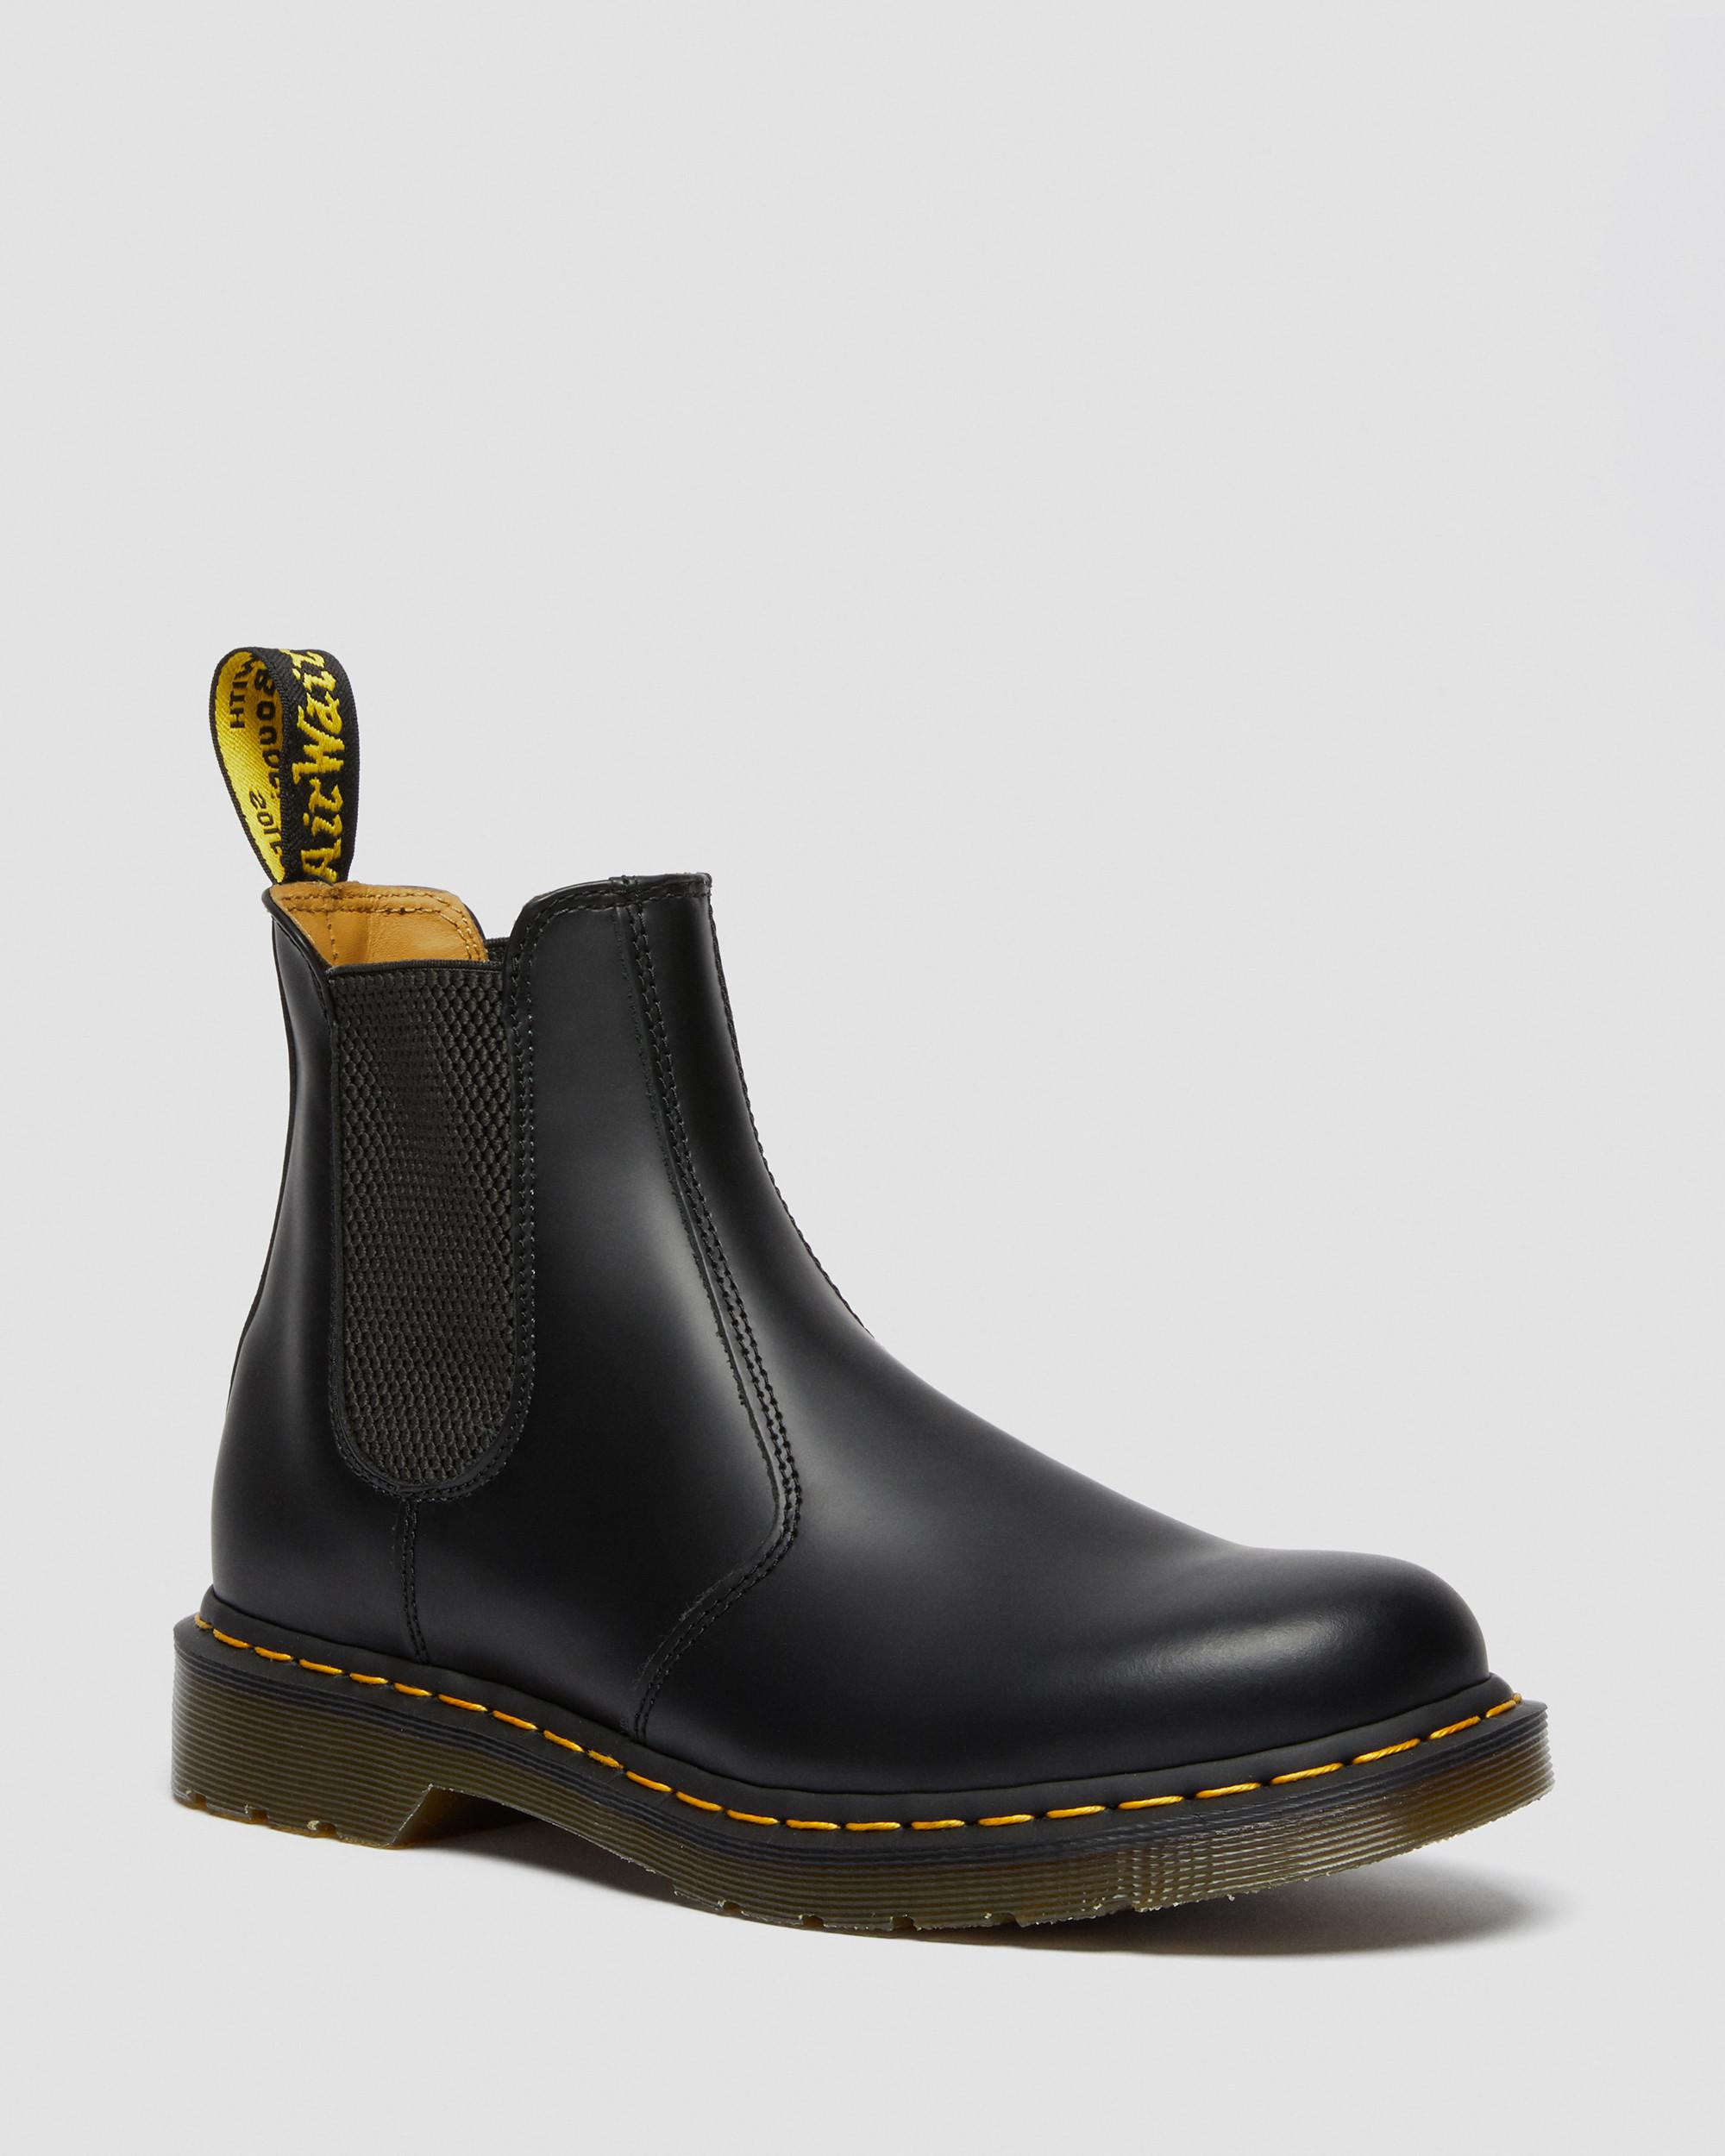 Stivaletti Chelsea 2976 in pelle Smooth e cuciture gialleStivaletti Chelsea di pelle  2976 con cuciture gialle Smooth Dr. Martens